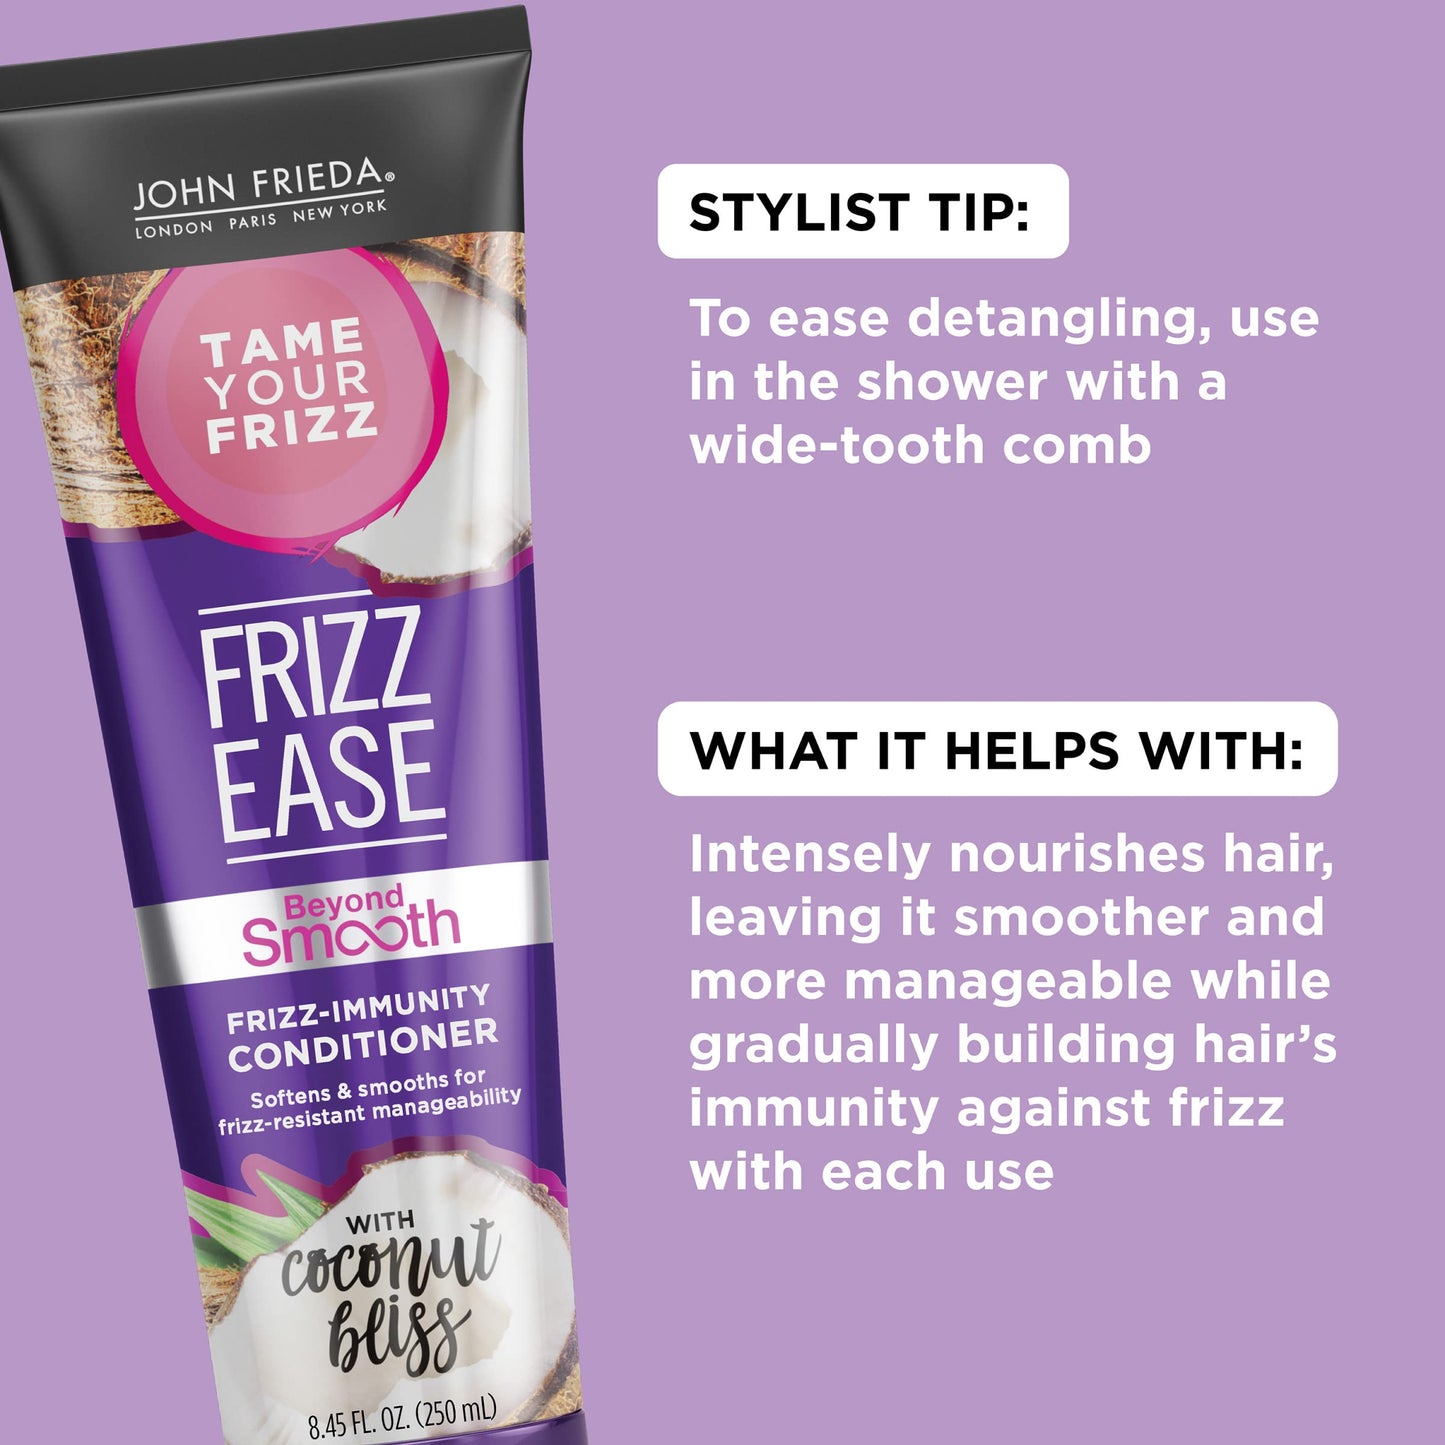 John Frieda Frizz Ease Beyond Smooth Frizz-Immunity Conditioner, 8.45 Ounces, Anti-Humidity Conditioner, Prevents Frizz, with Pure Coconut Oil